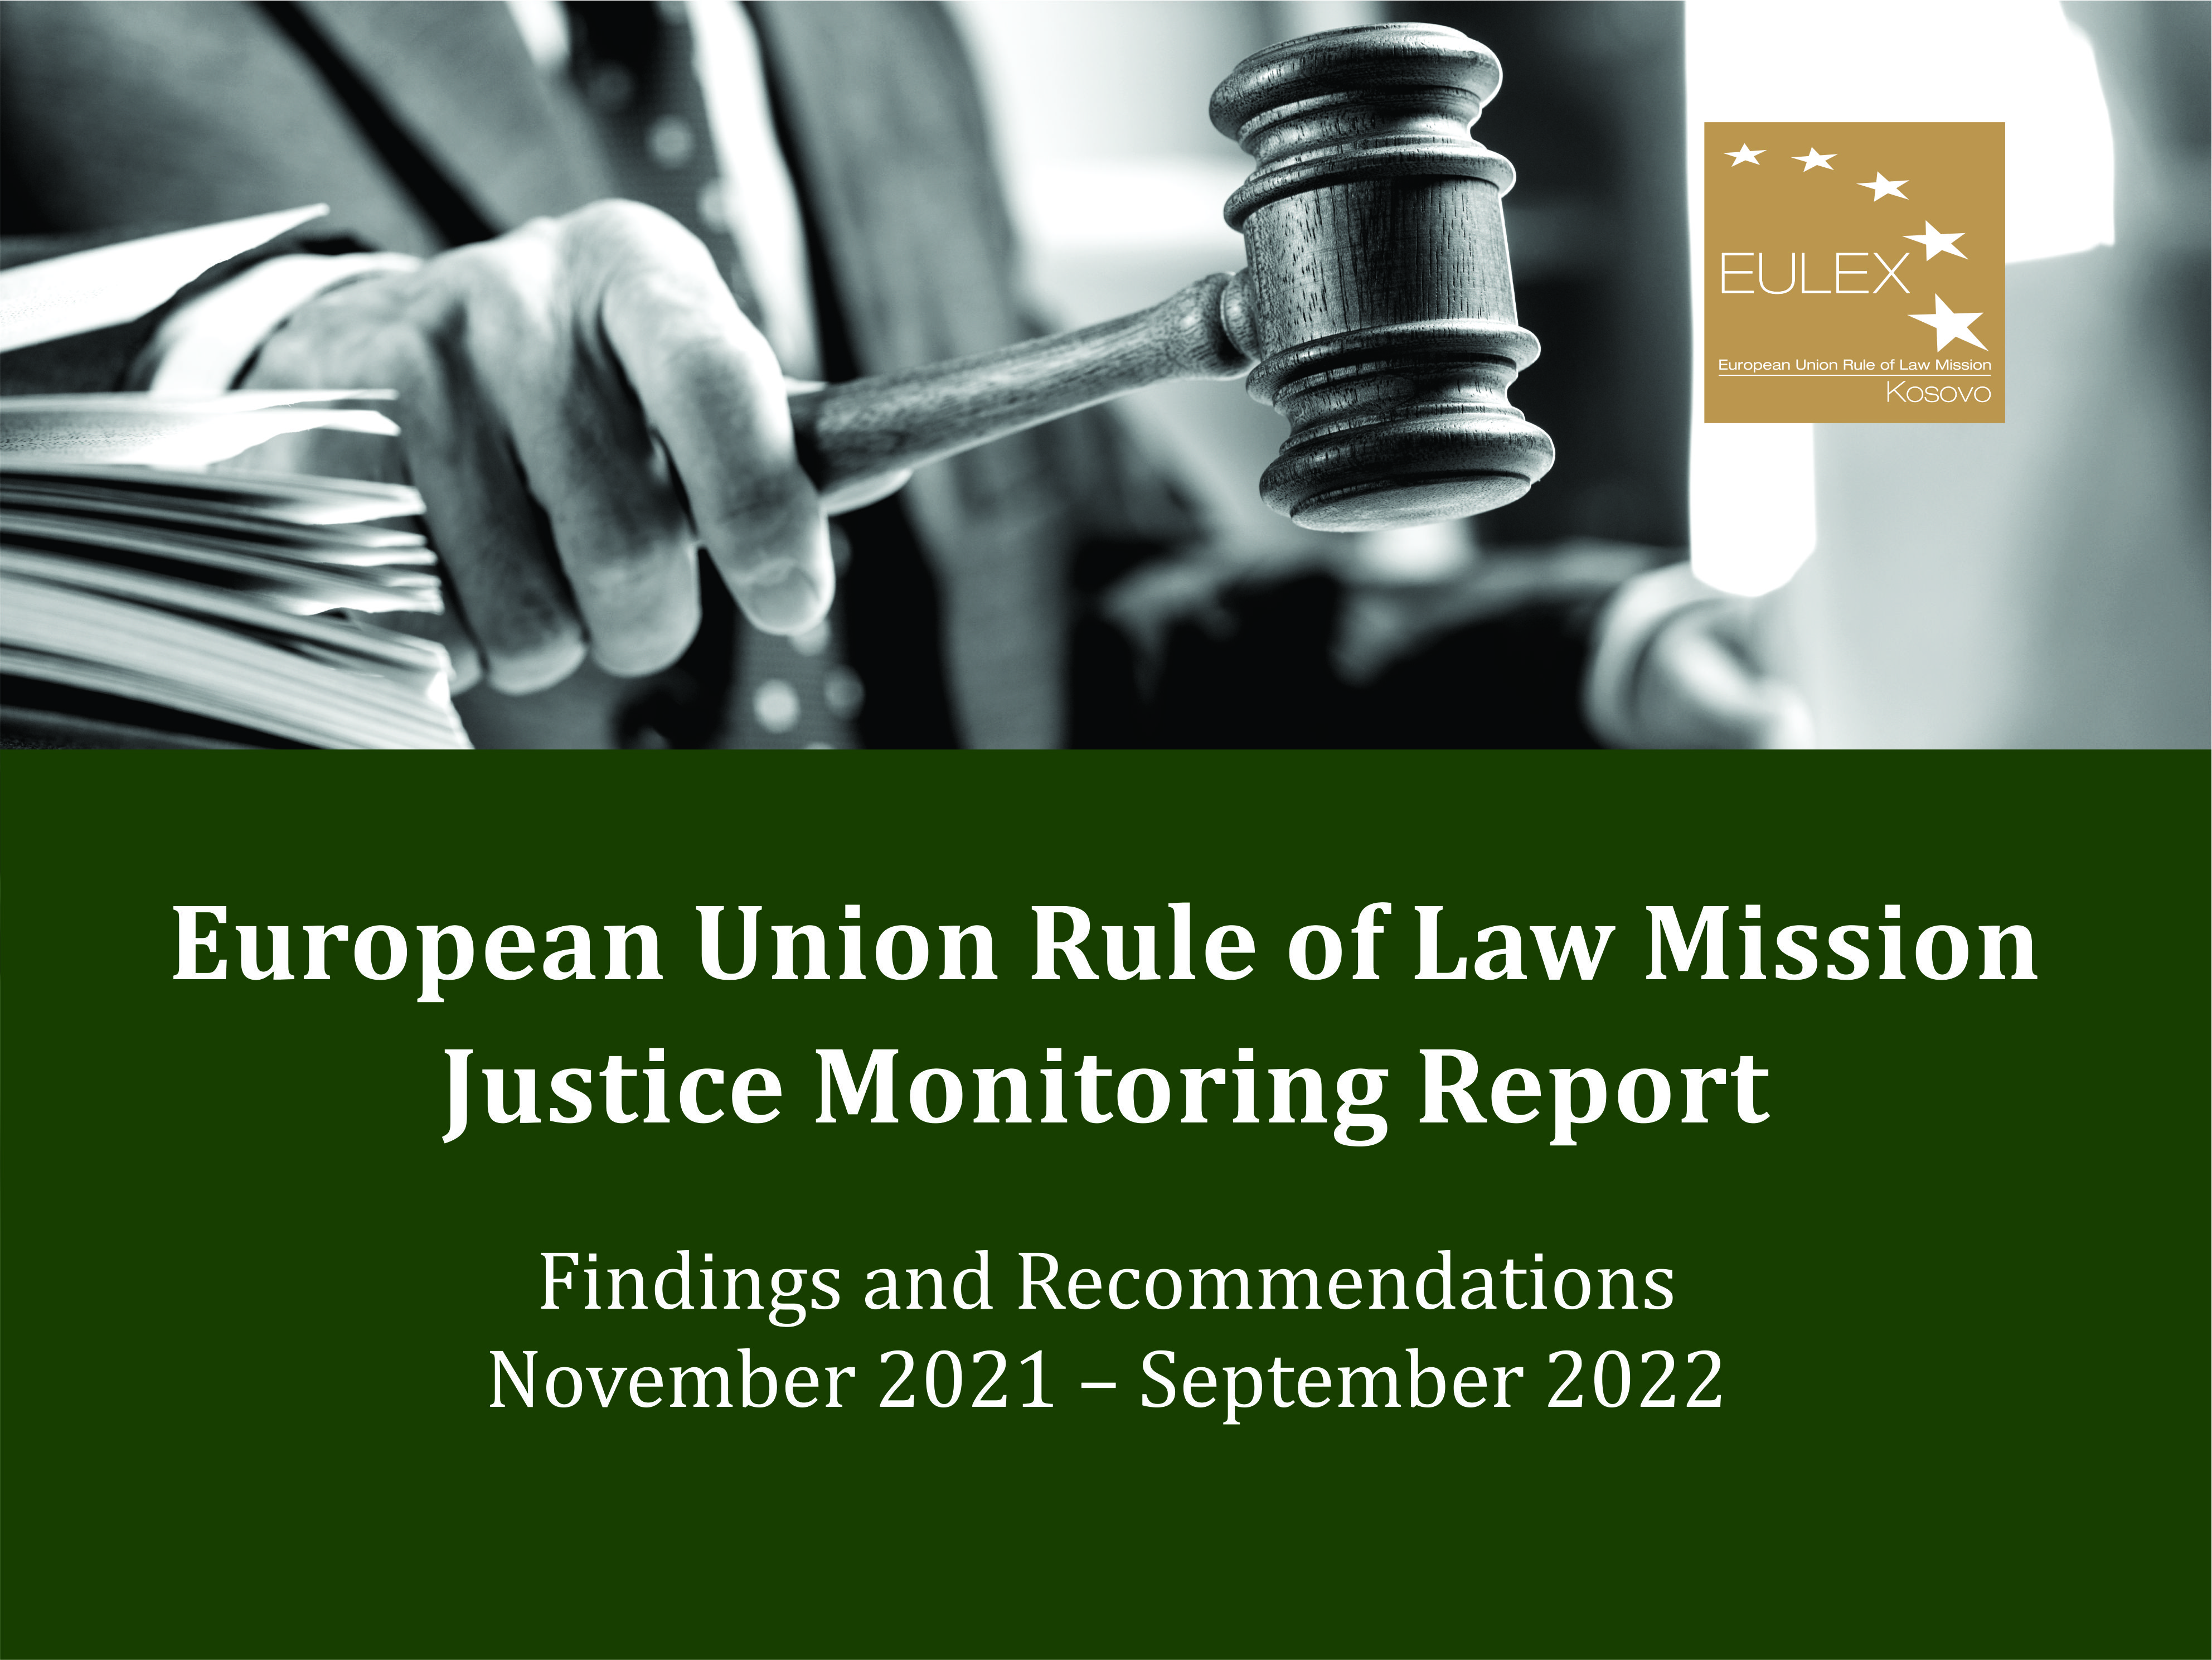 EULEX’s Justice Monitoring Report